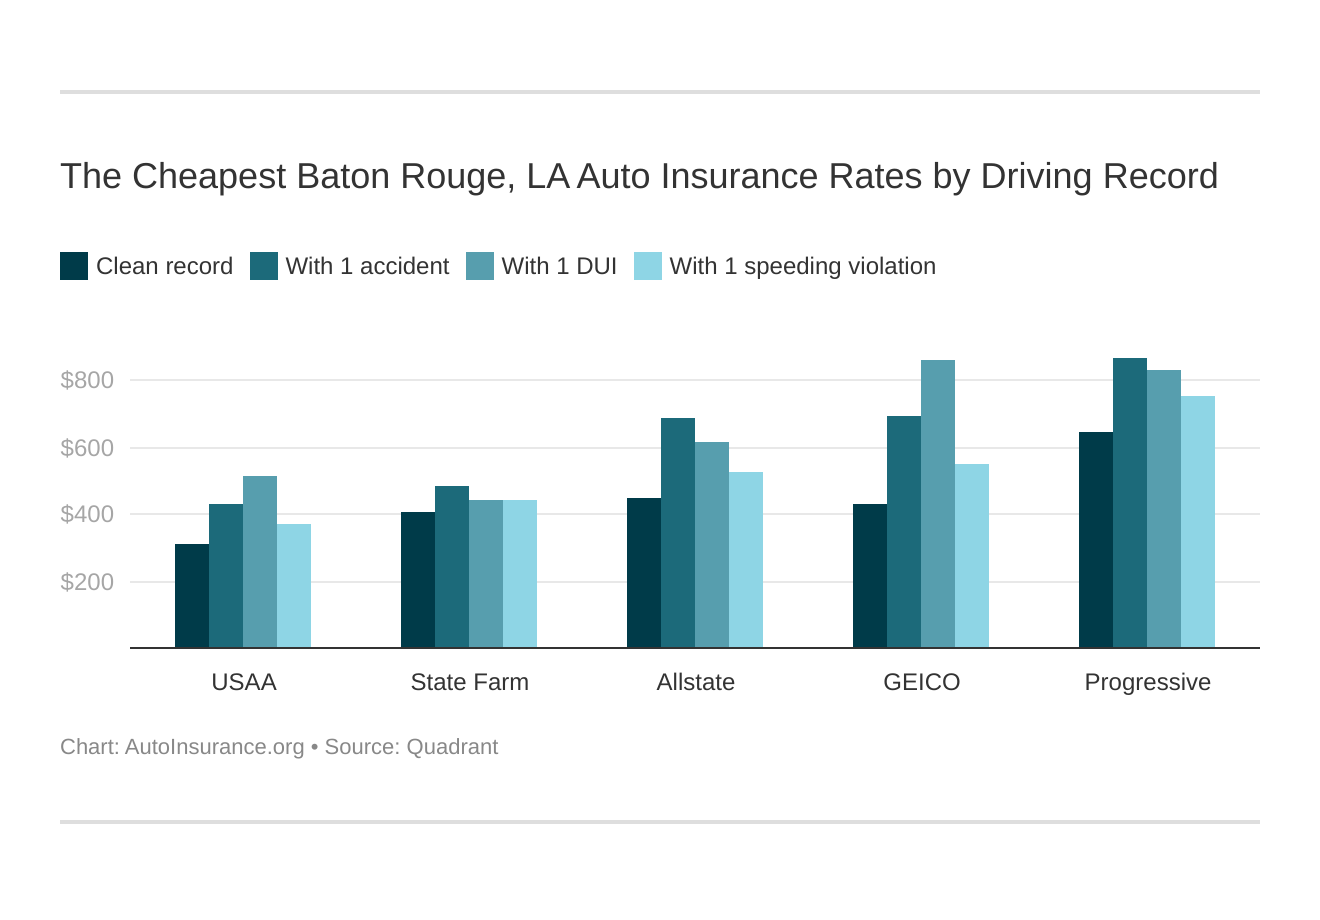 The Cheapest Baton Rouge, LA Auto Insurance Rates by Driving Record